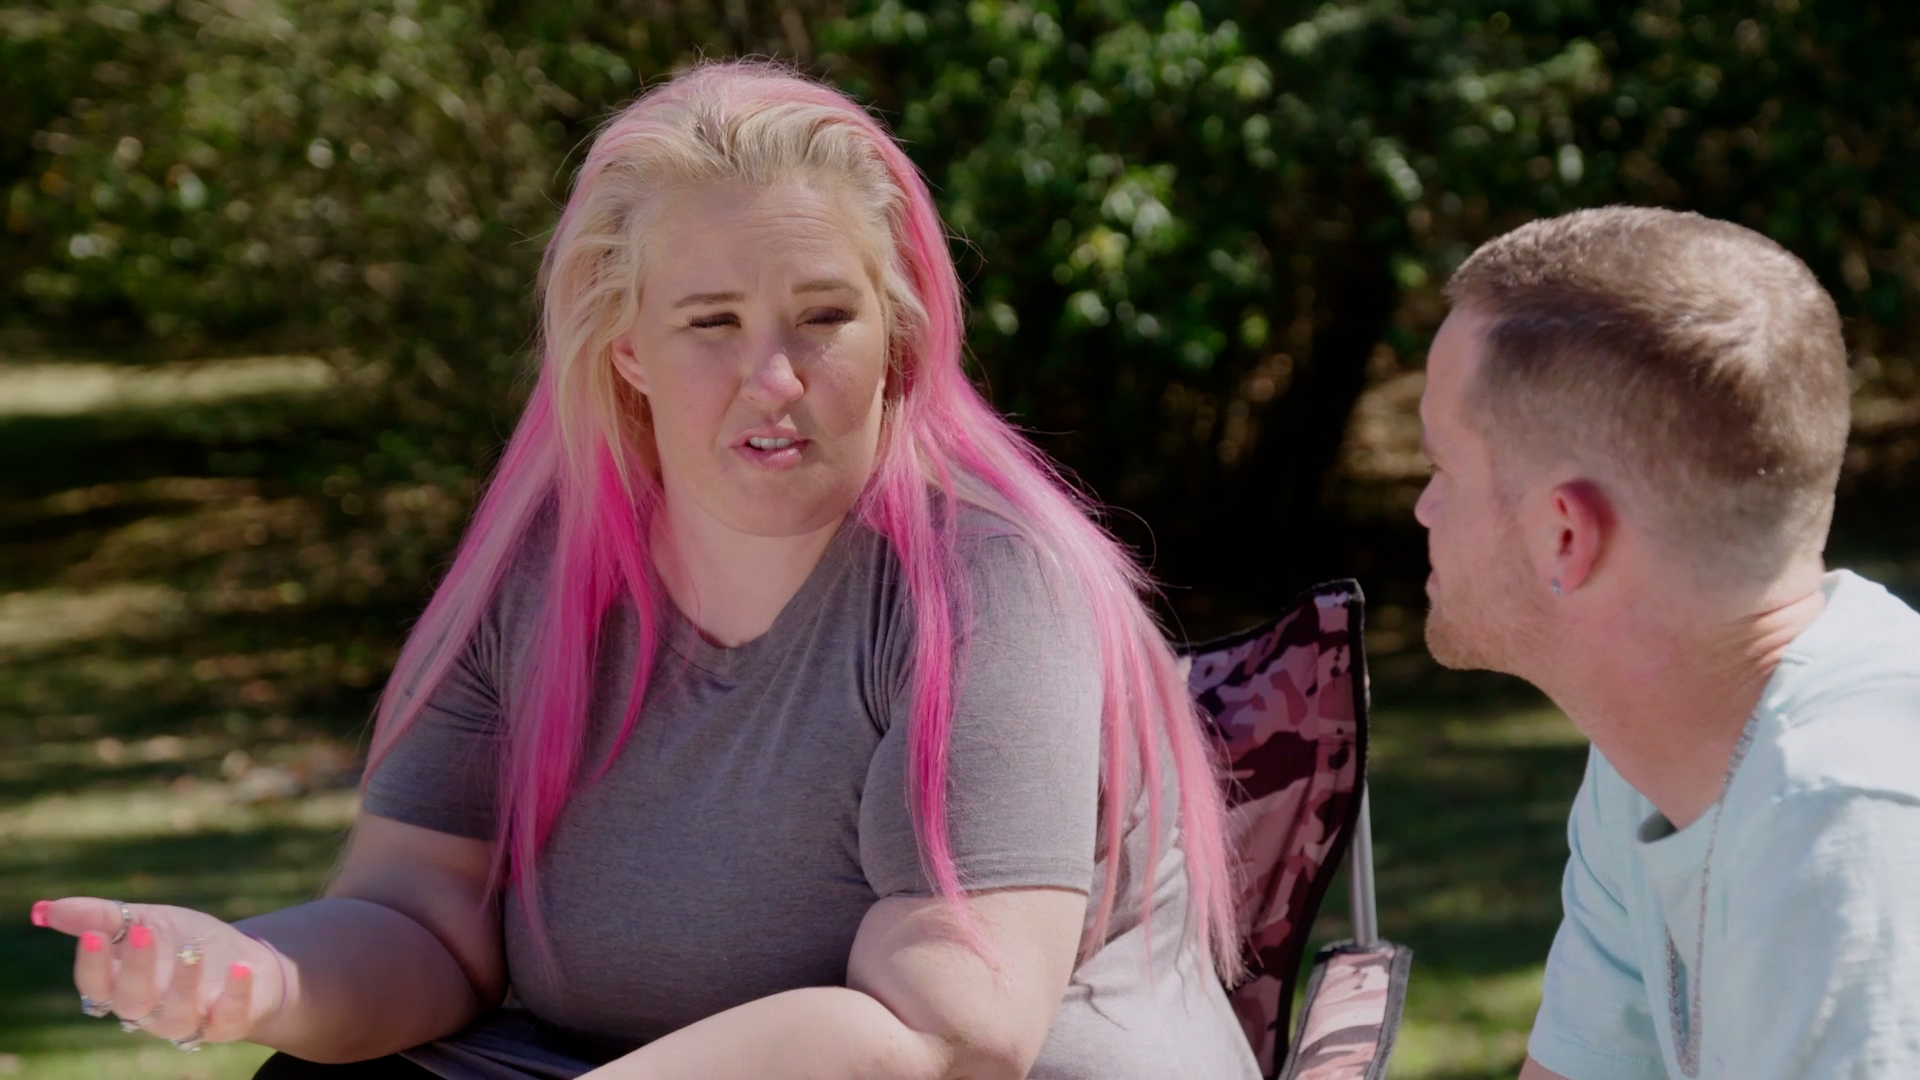 Watch June Wants to Make Amends | Mama June: From Not to Hot Video Extras